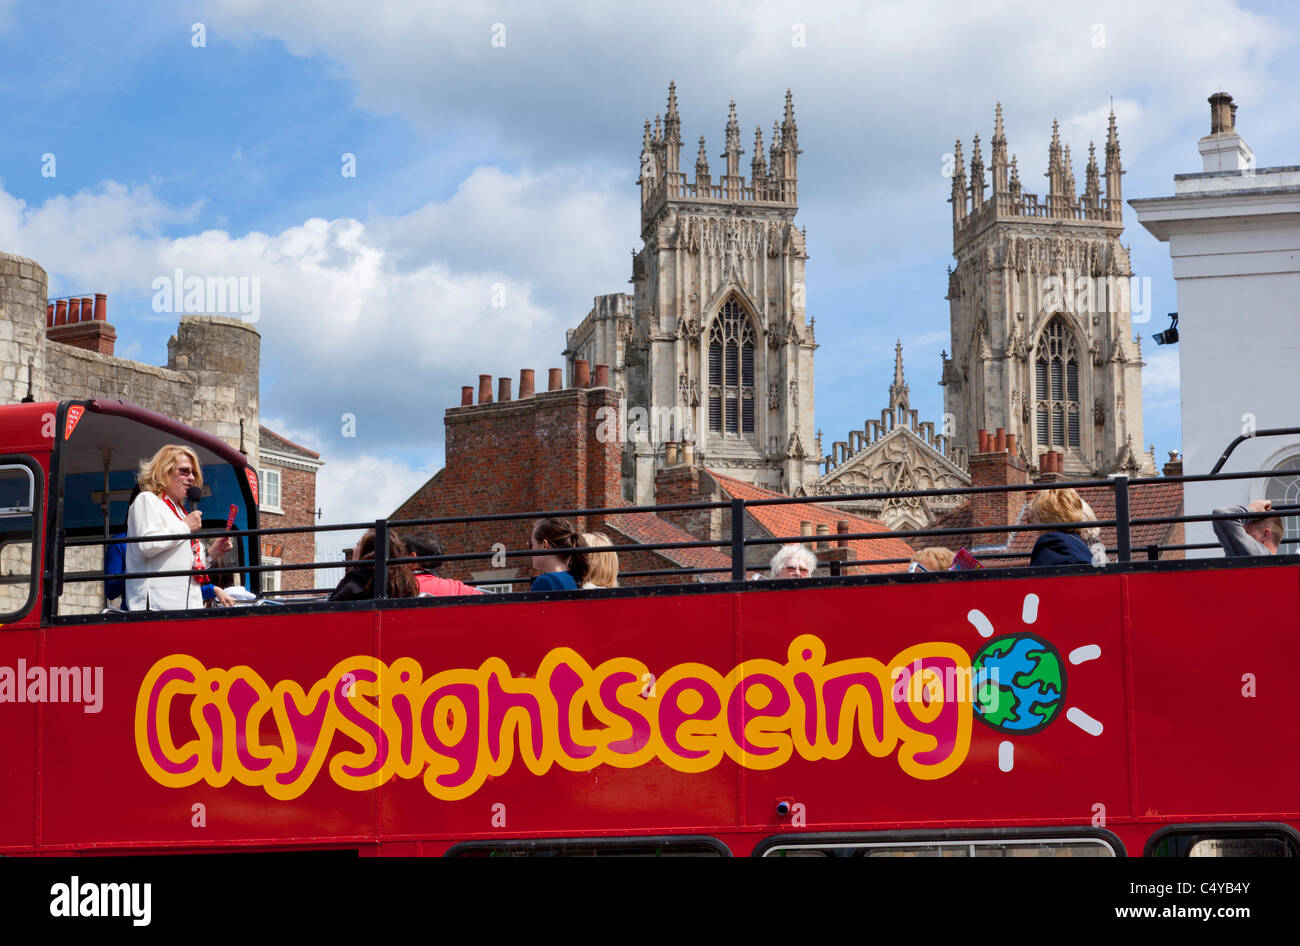 City sightseeing tour bus in the city of York with the Minster behind Yorkshire England UK GB EU Europe Stock Photo